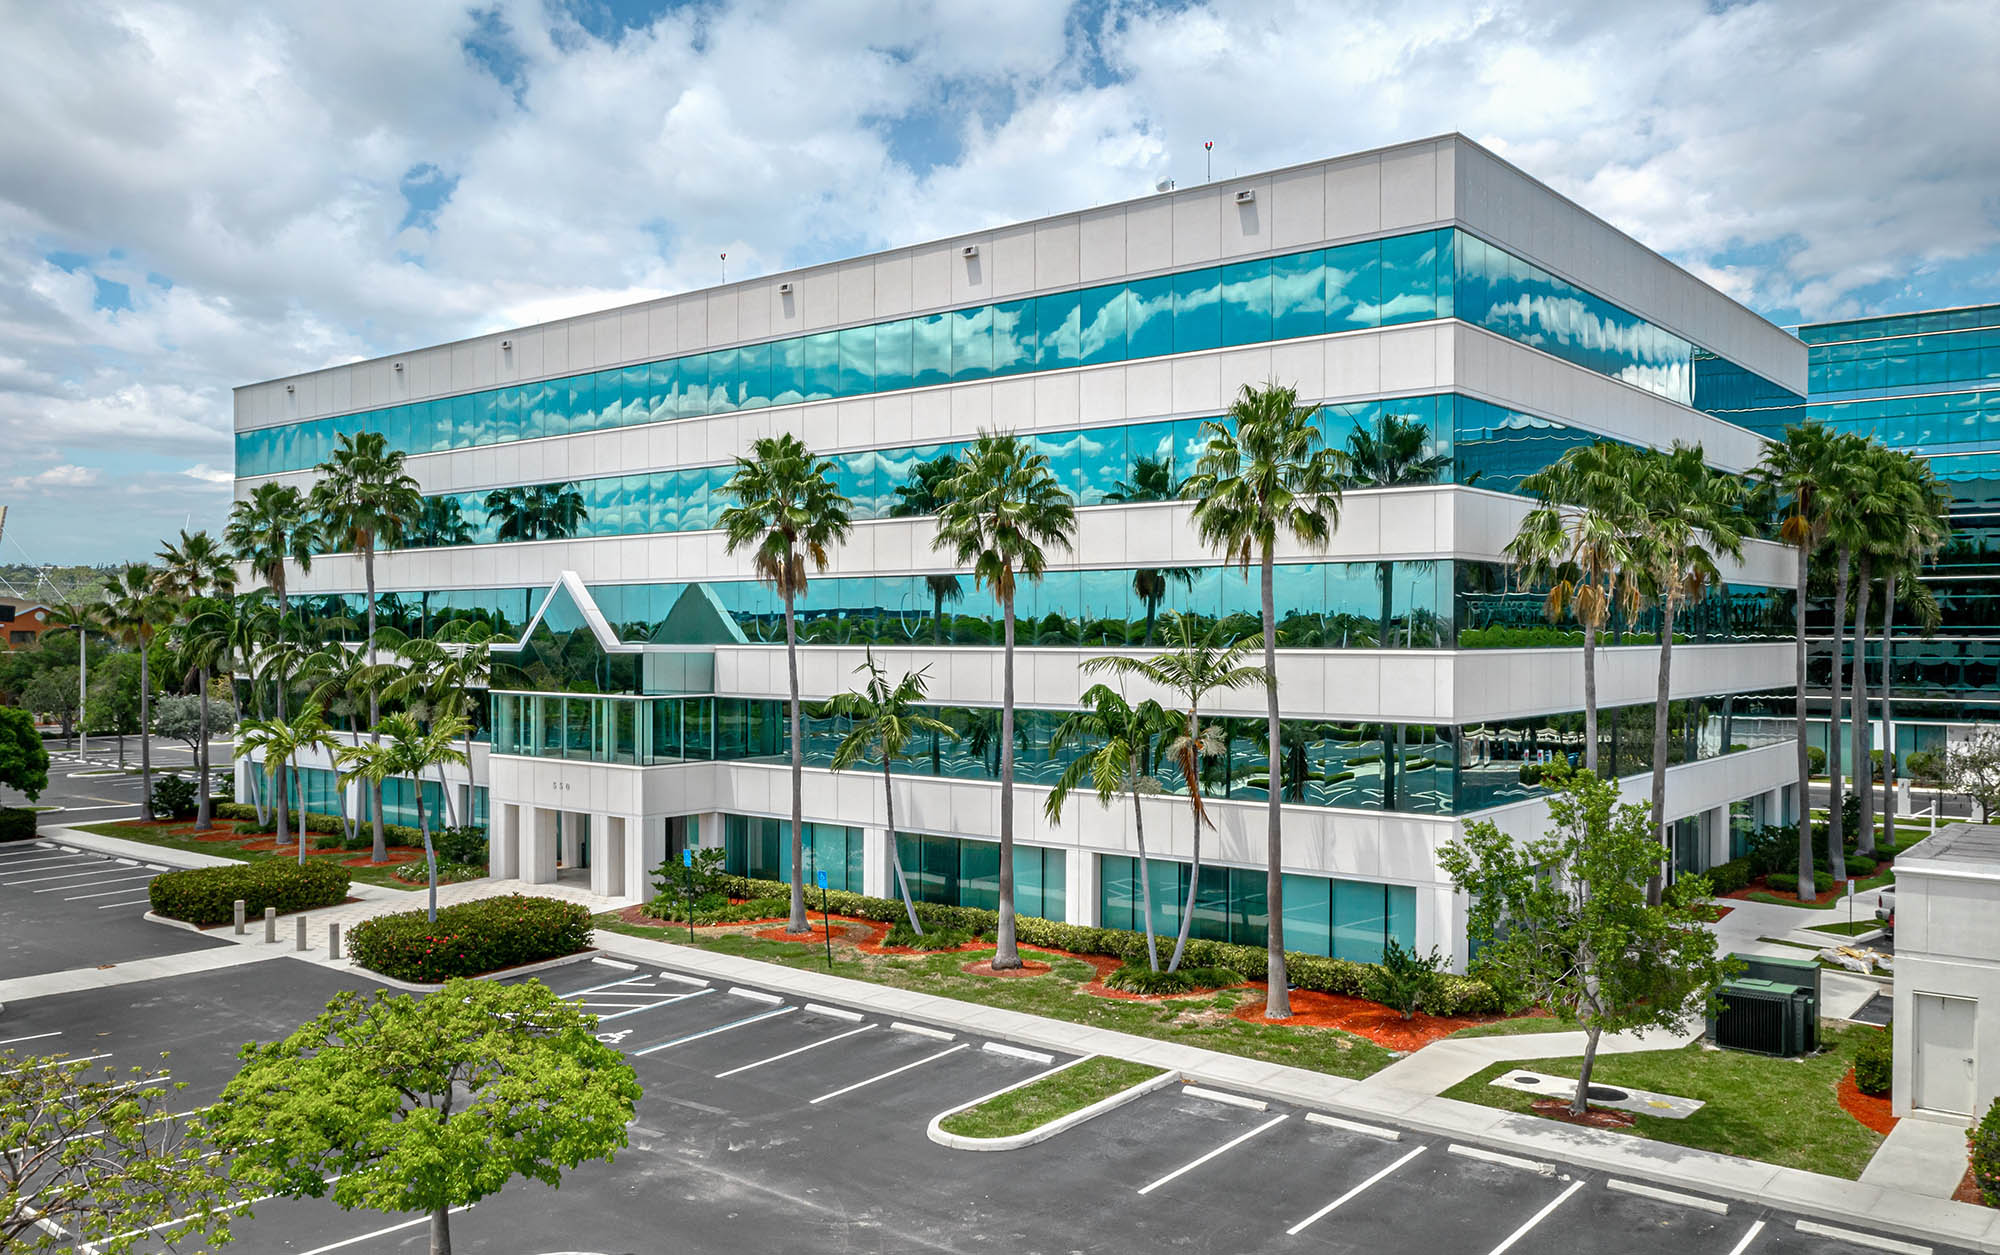 Fort Lauderdale’s 259,458 SF Pinnacle Corporate Park portfolio comes to market as investors eye office assets near I-95 and Tri-Rail